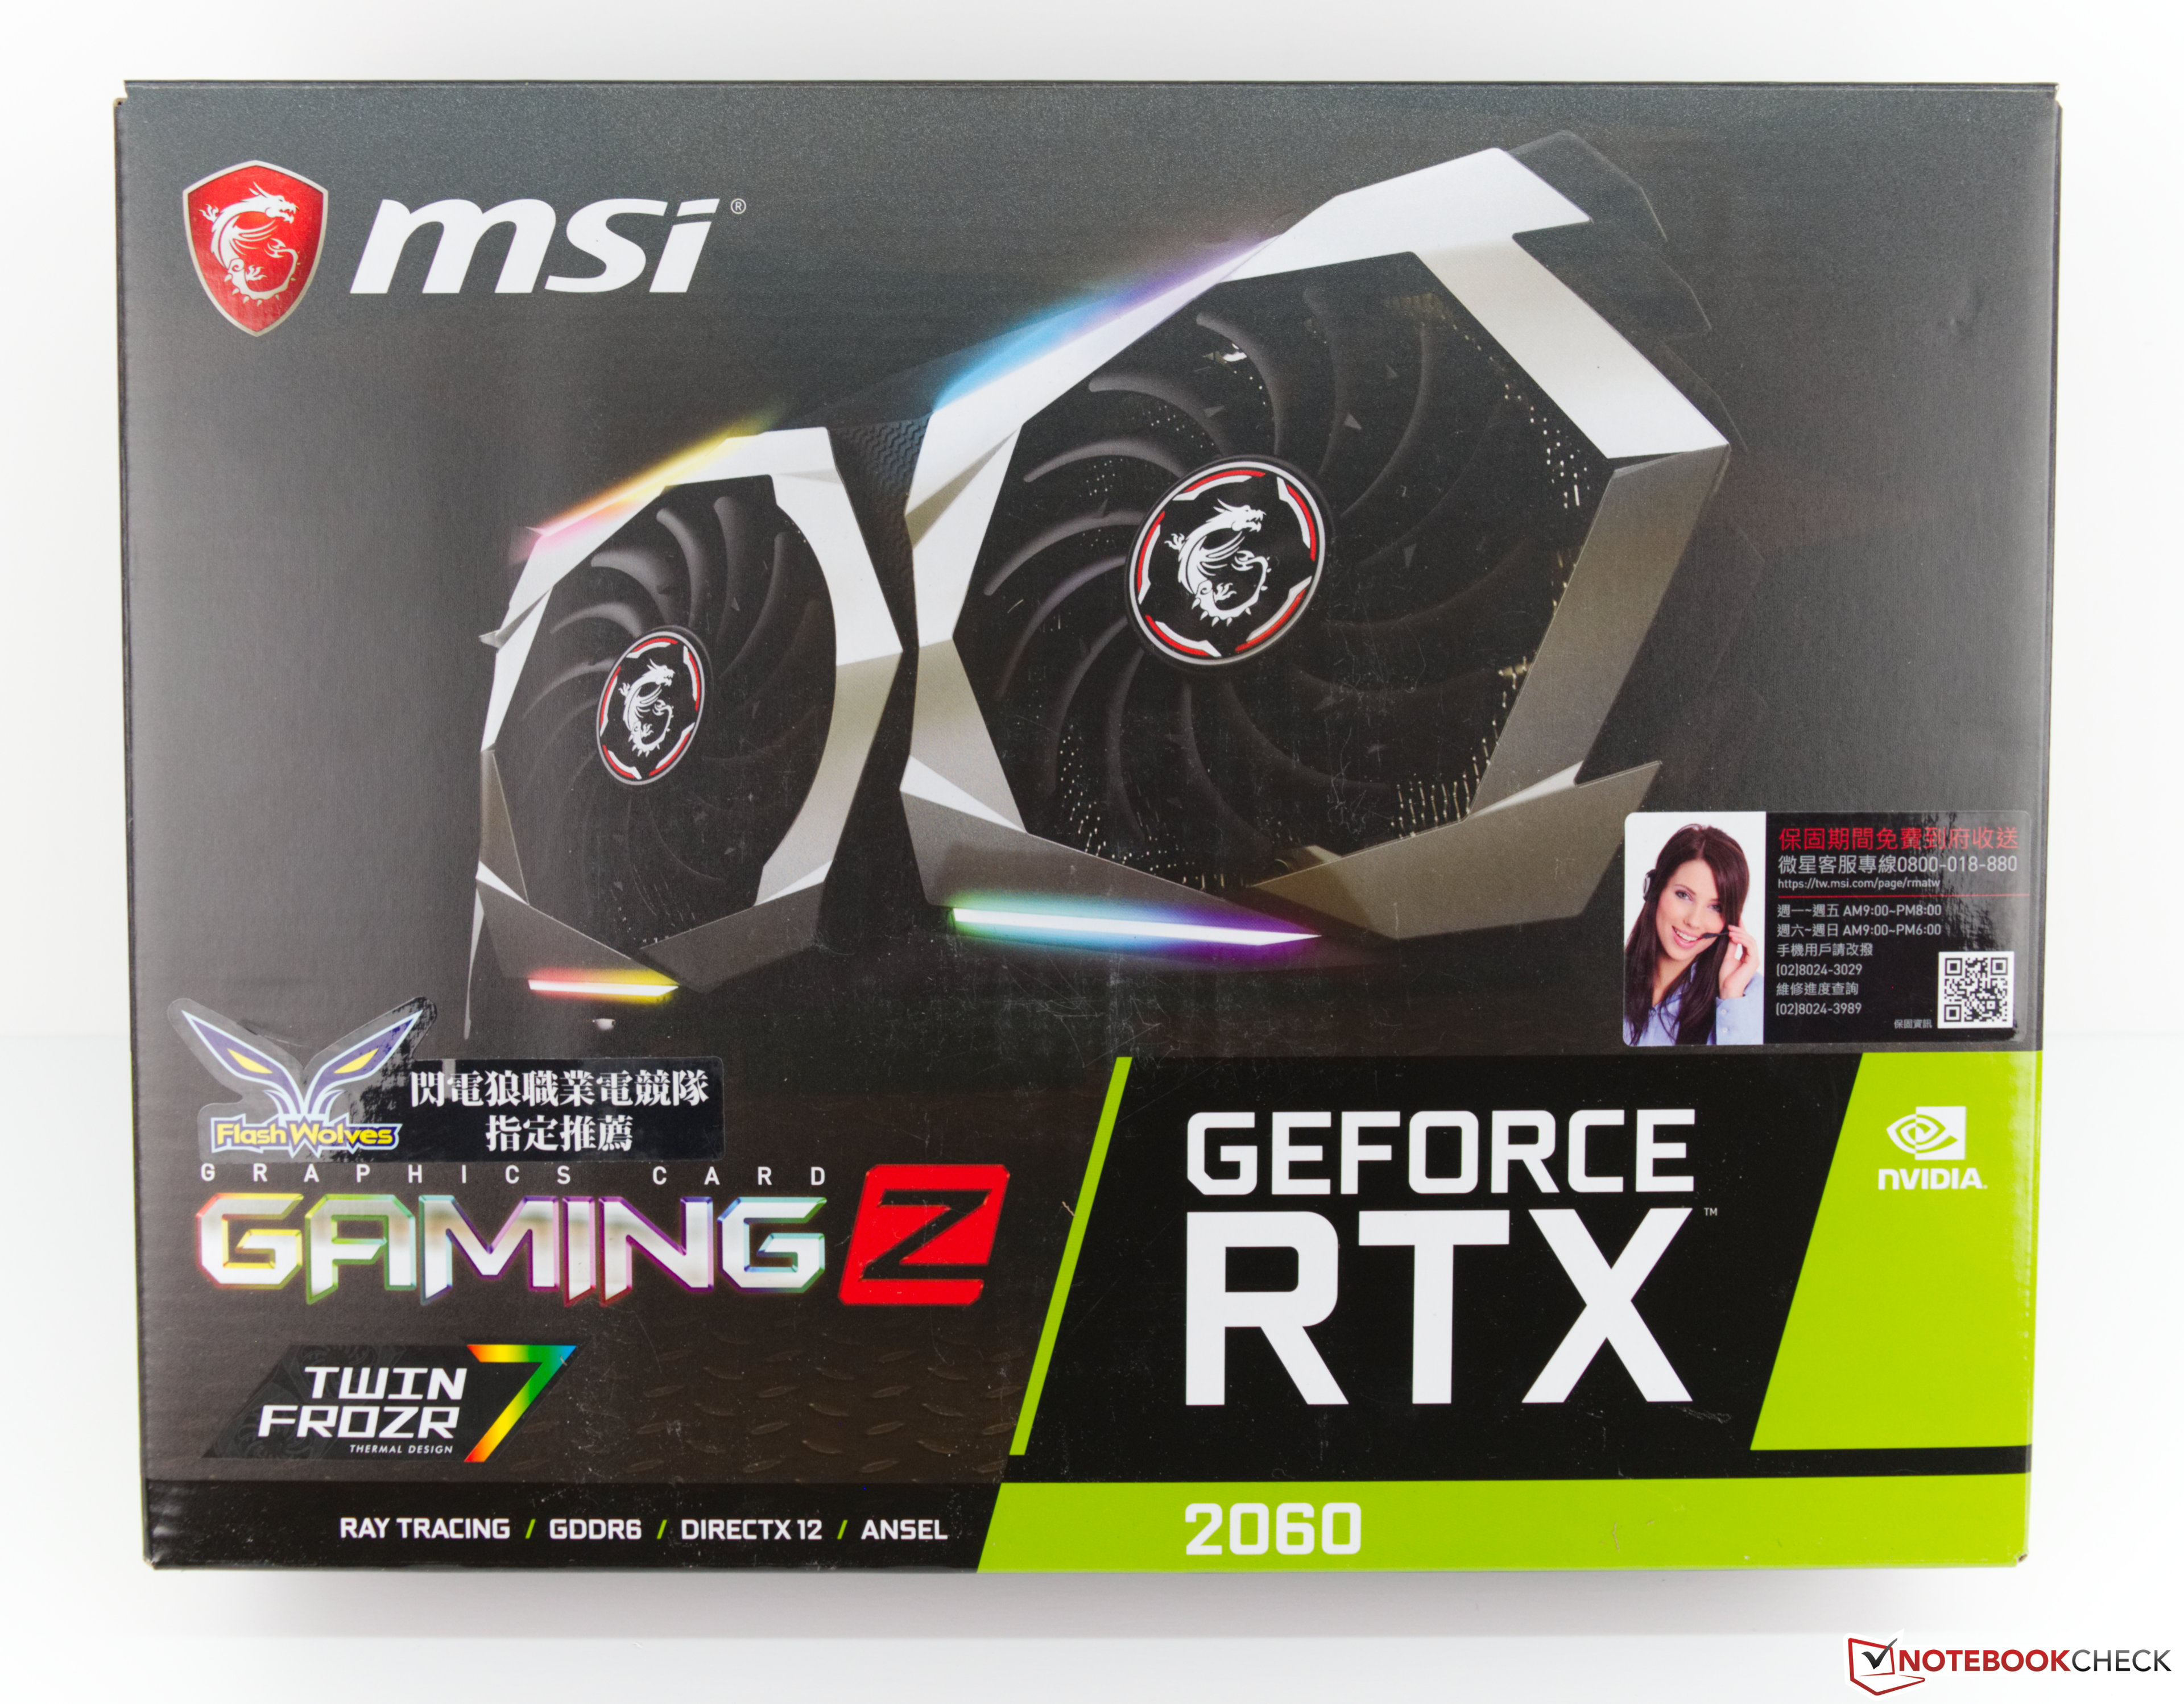 MSI RTX 2060 Gaming Z 6G Desktop Graphics Card Review - NotebookCheck